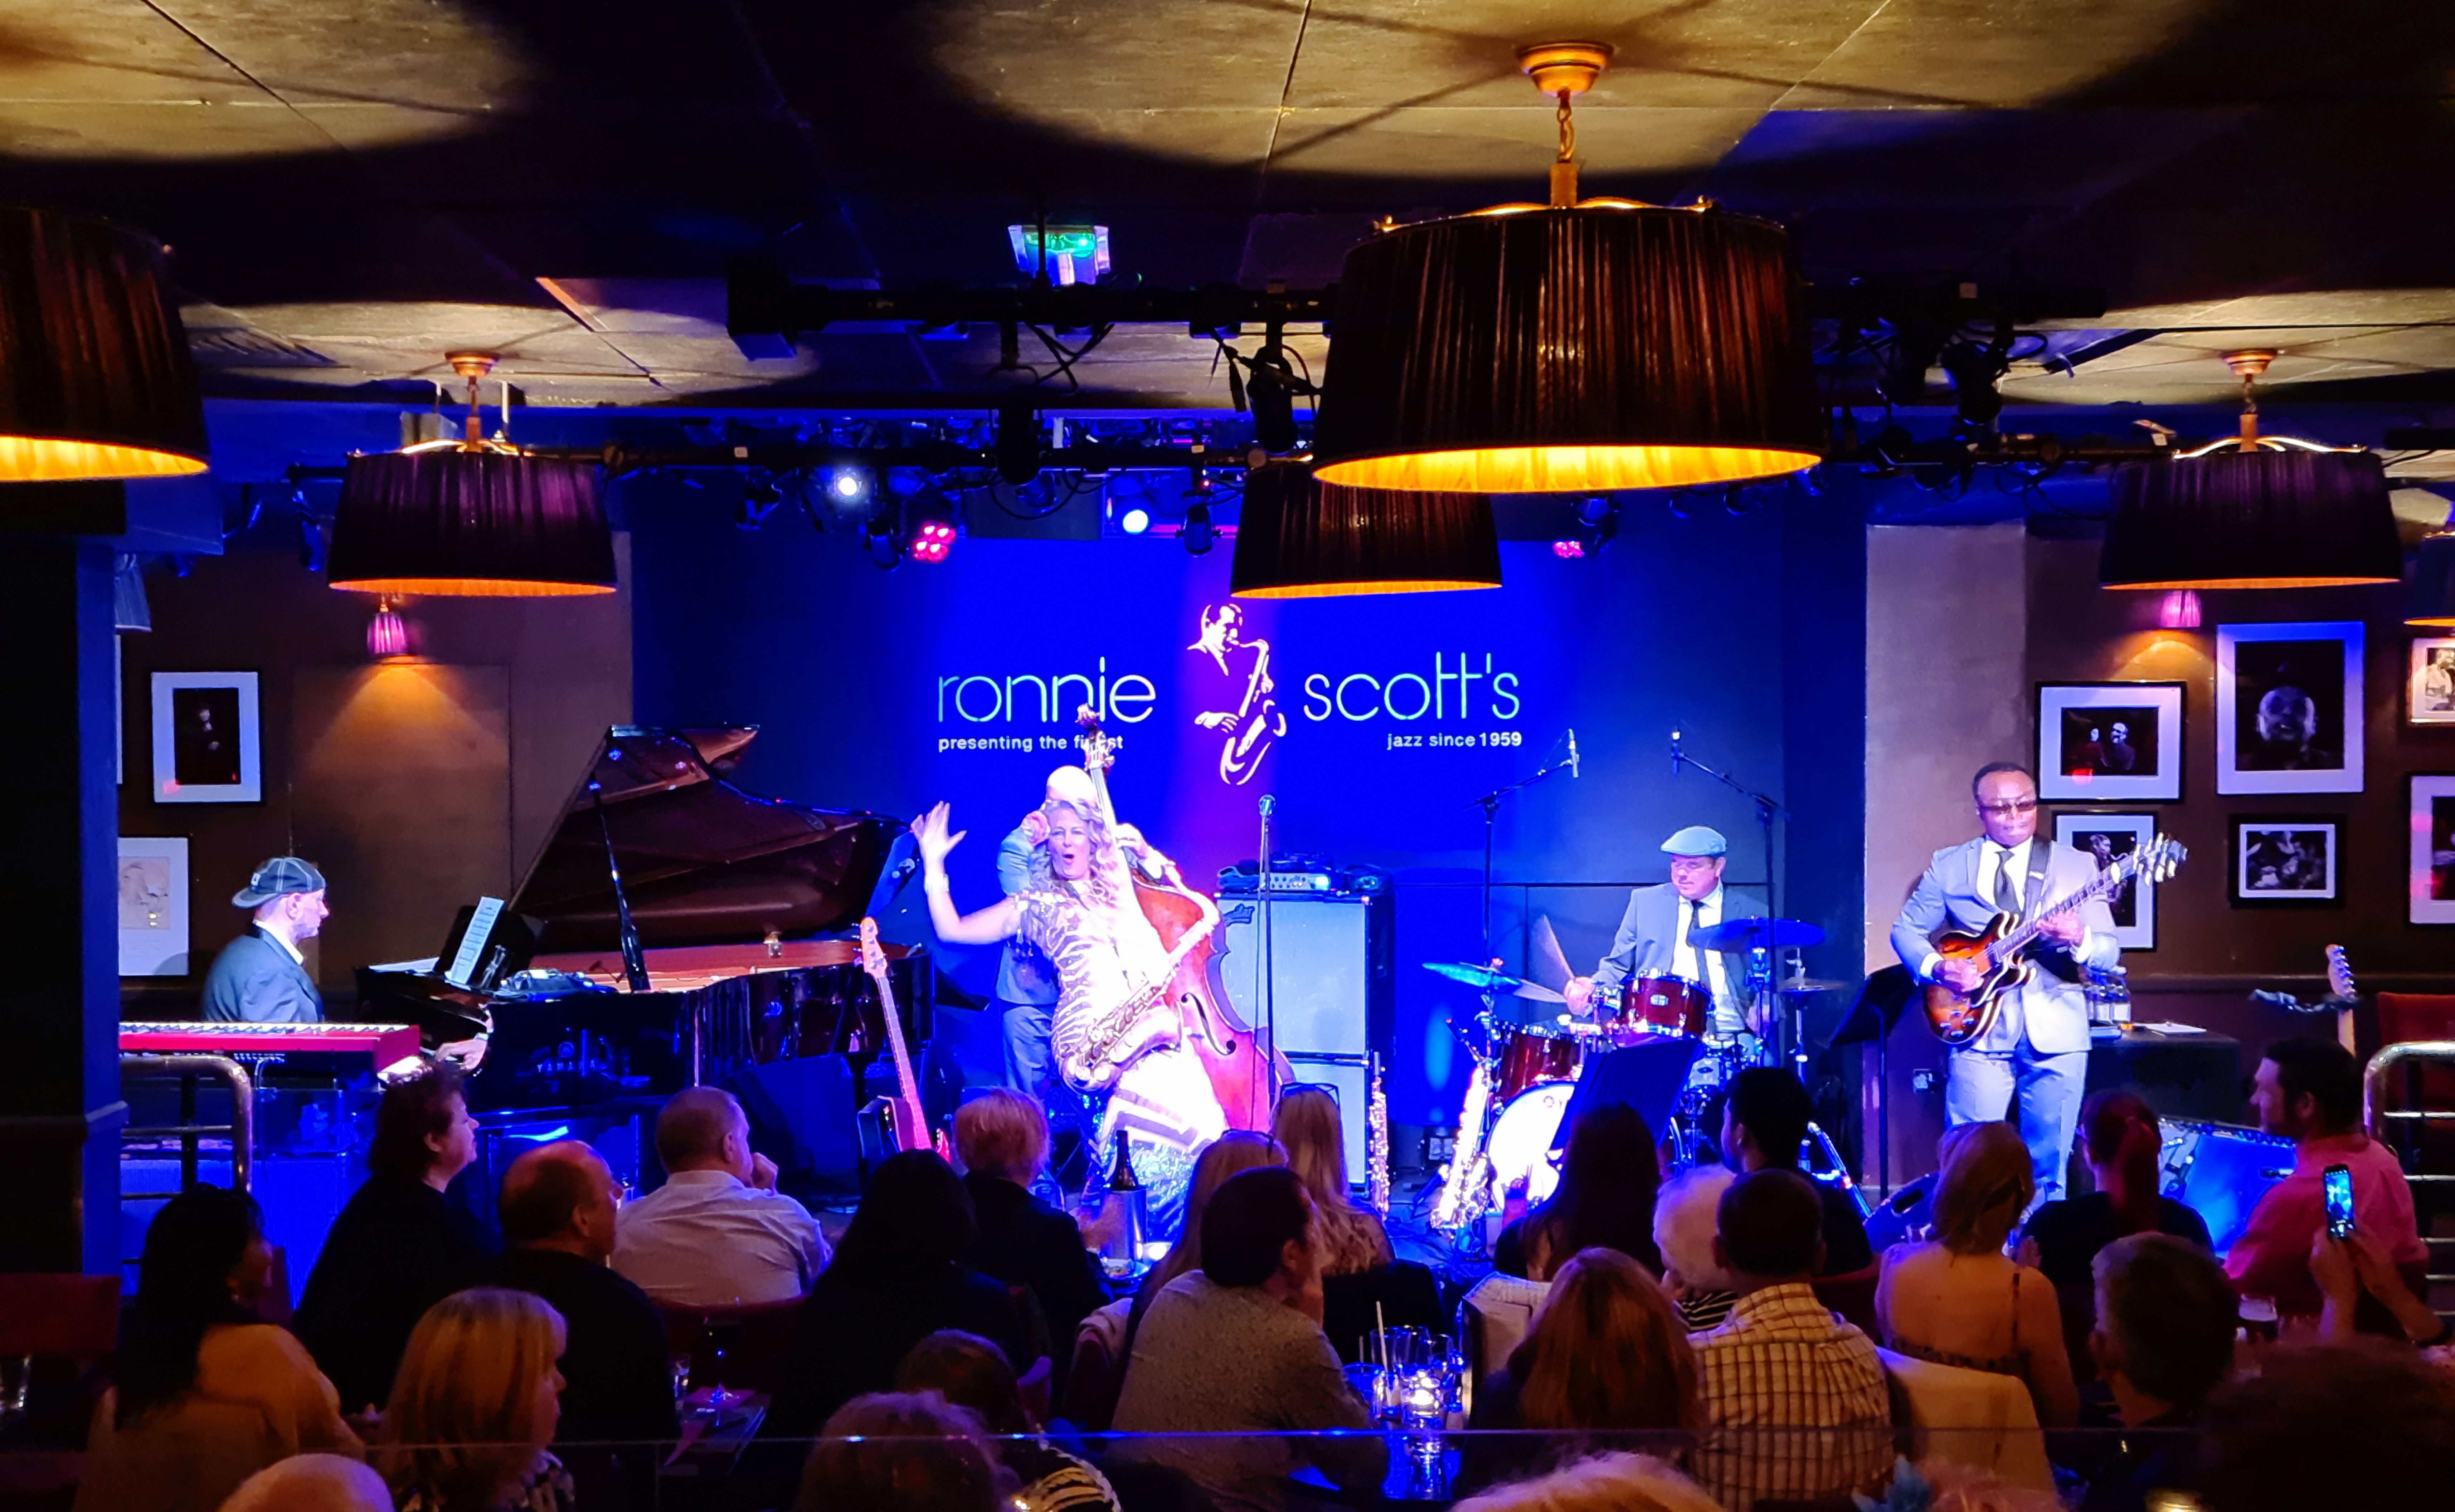 On stage at Ronnie Scott's